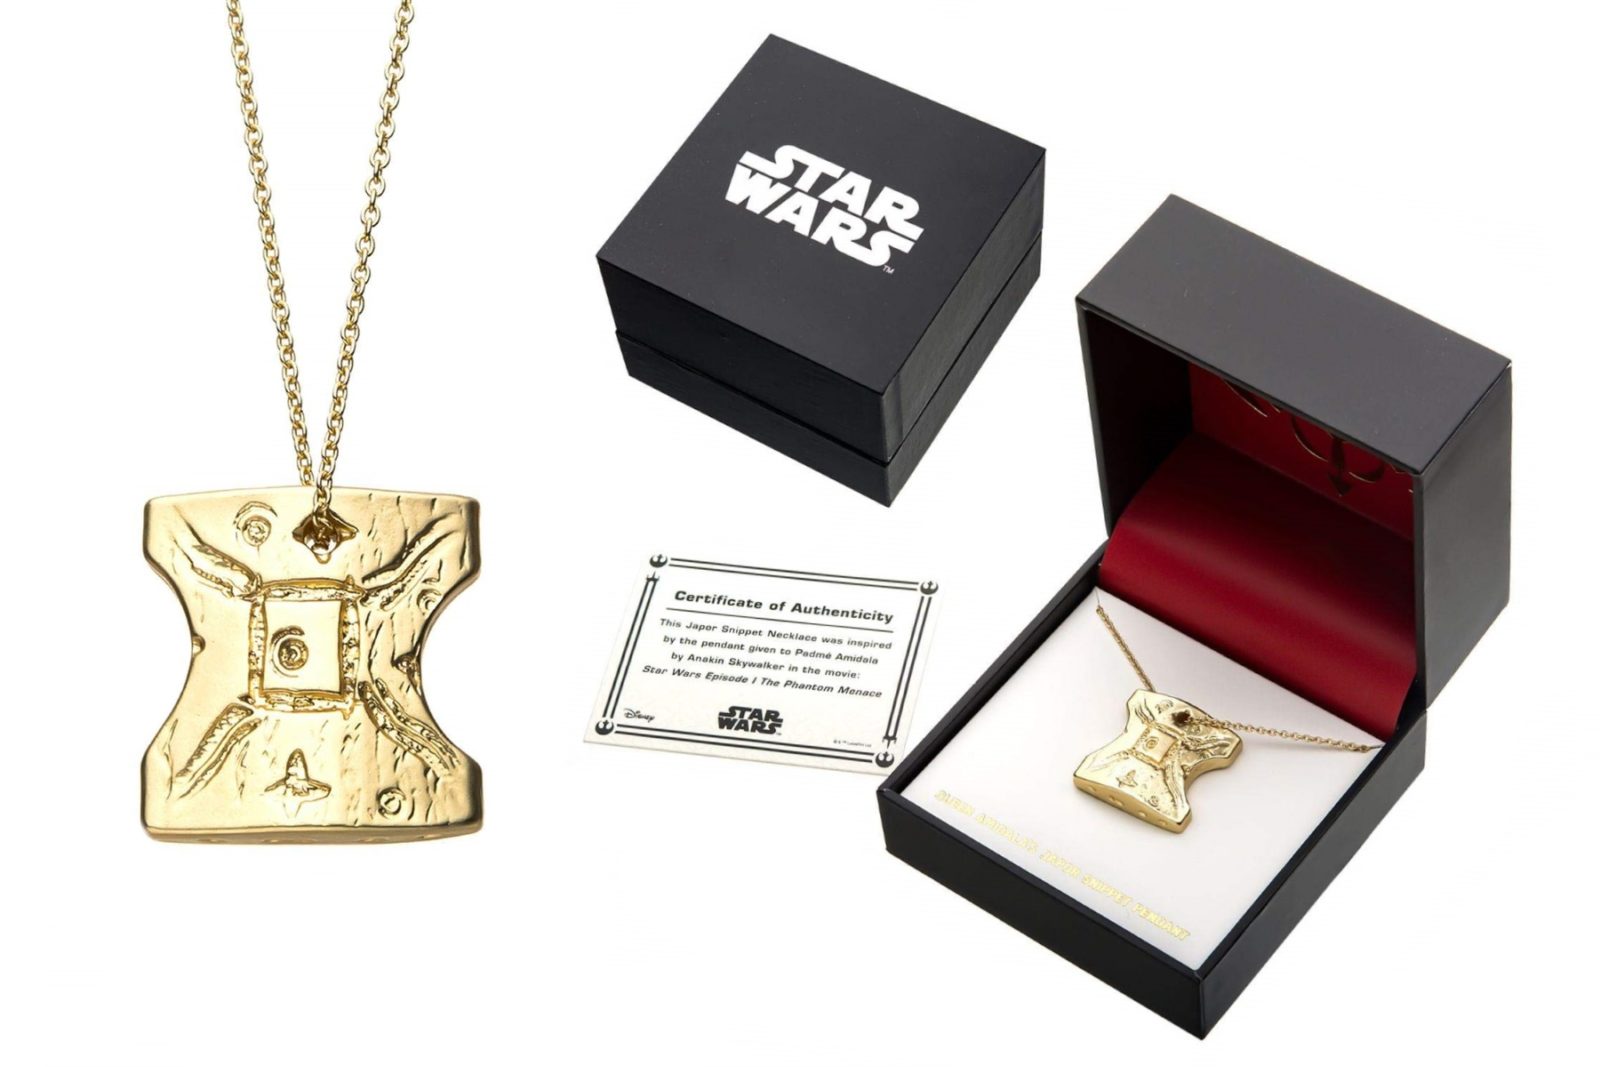 Star Wars Japor Snippet Necklace on Amazon